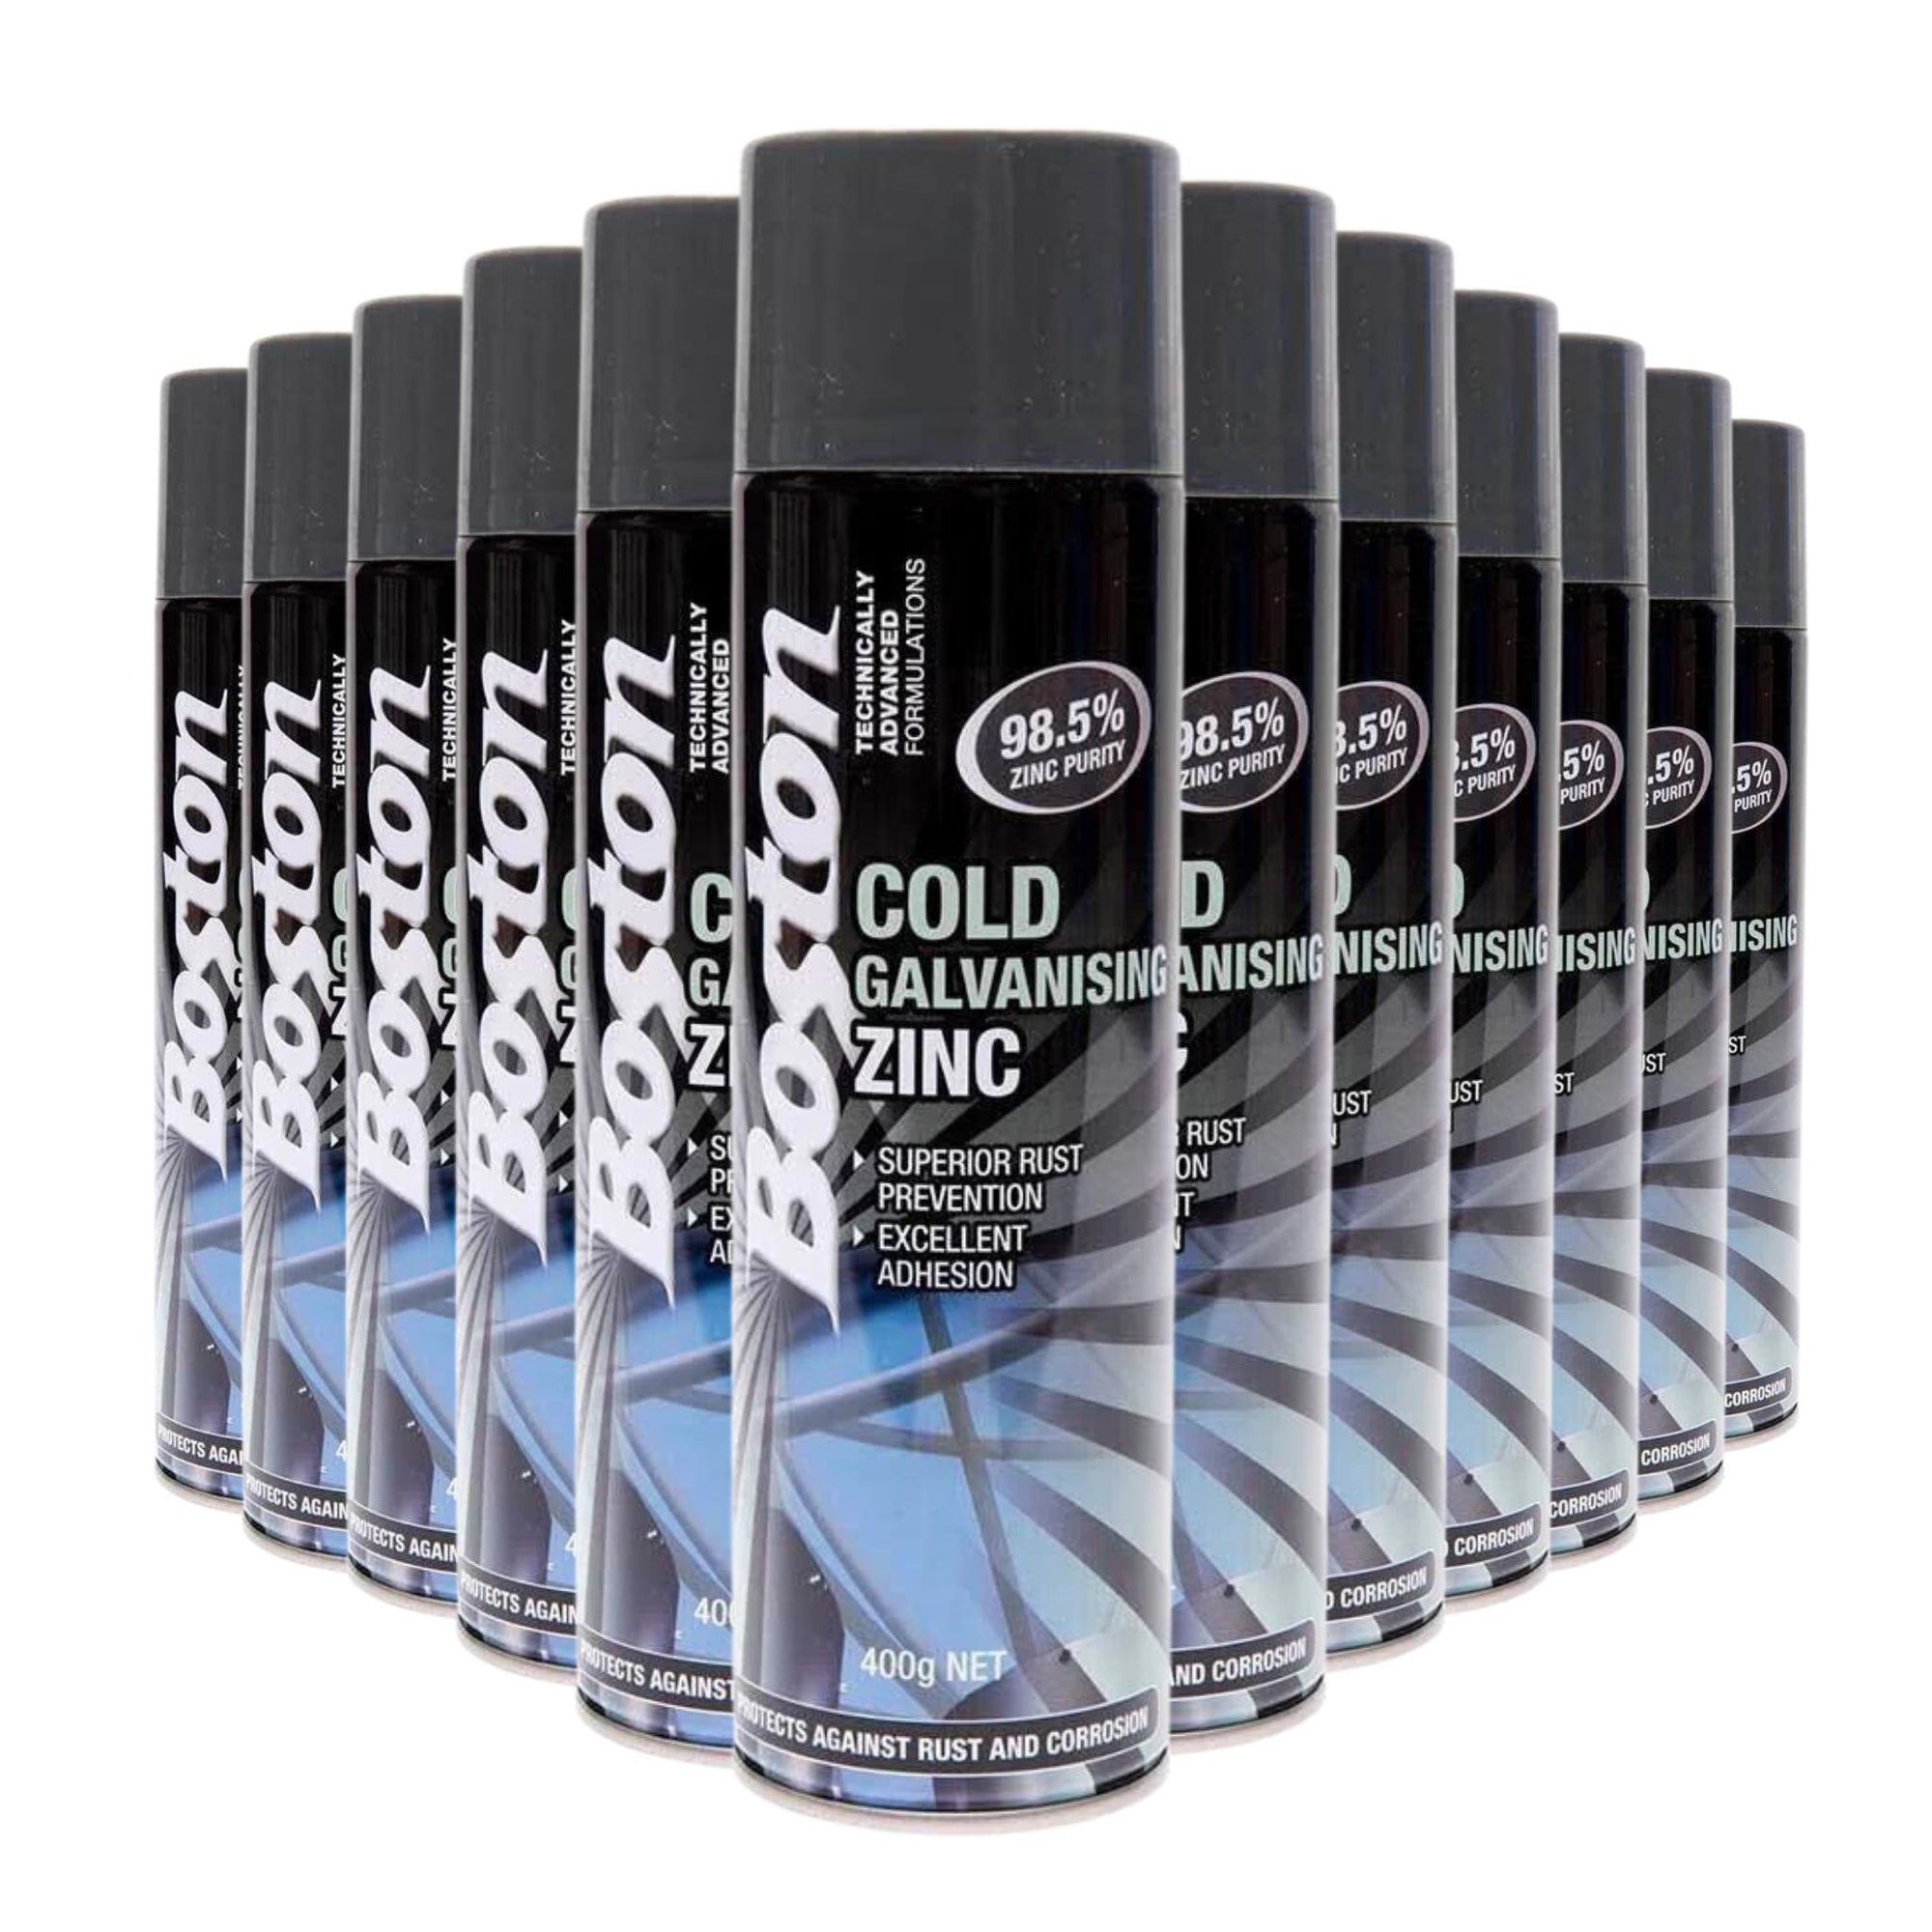 12 Cans | Boston Cold Galvanizing Spray | BT250 | 400g - South East Clearance Centre